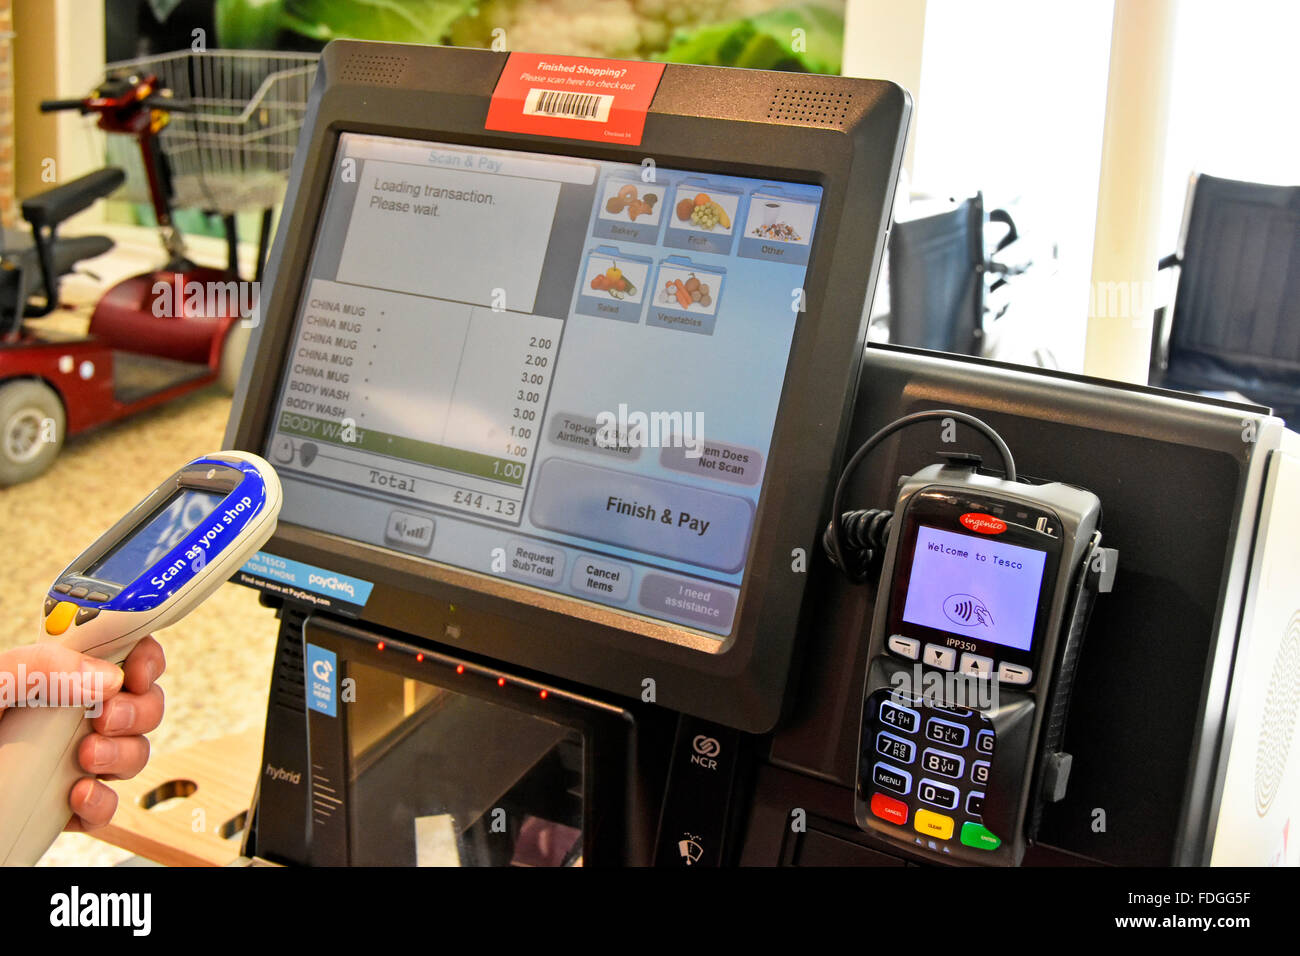 Tesco shopper aiming her Scan as you shop device to upload shopping items onto screen for payment at self service checkout till in London England UK Stock Photo